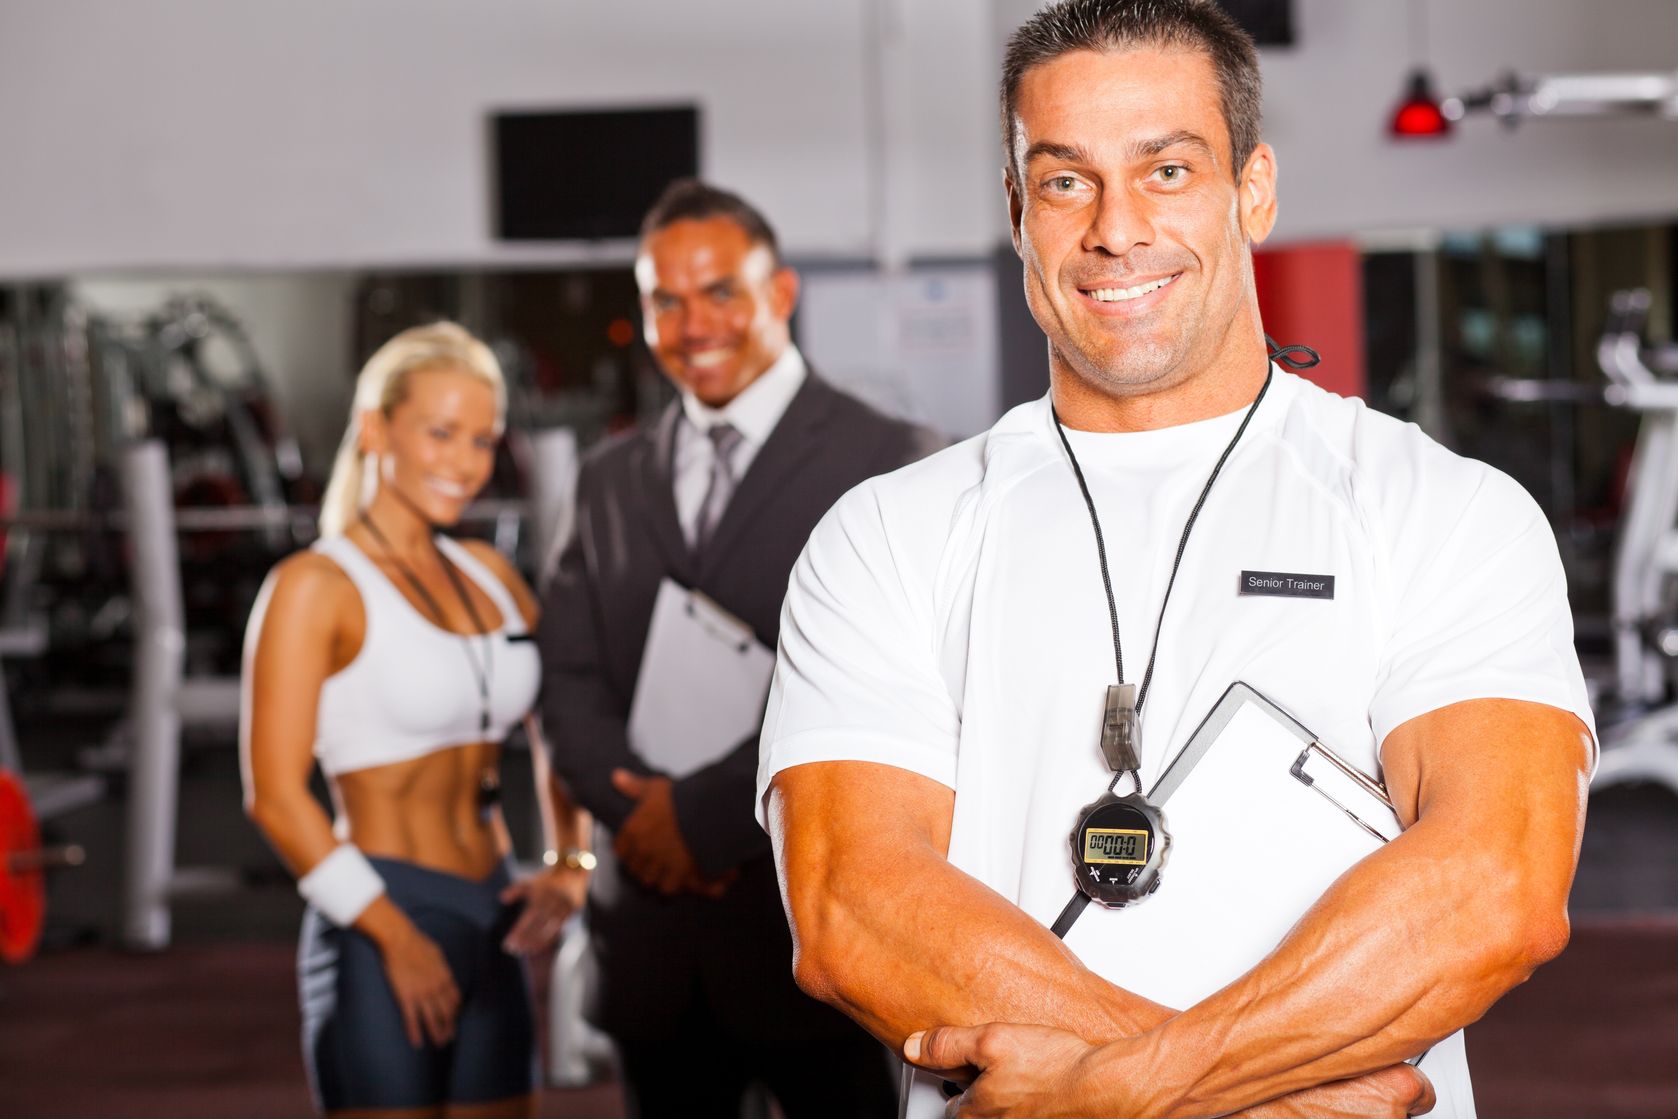 HOW TO SELECT THE BEST STRENGTH COACH/PERSONAL TRAINER TO MEET YOUR GOALS